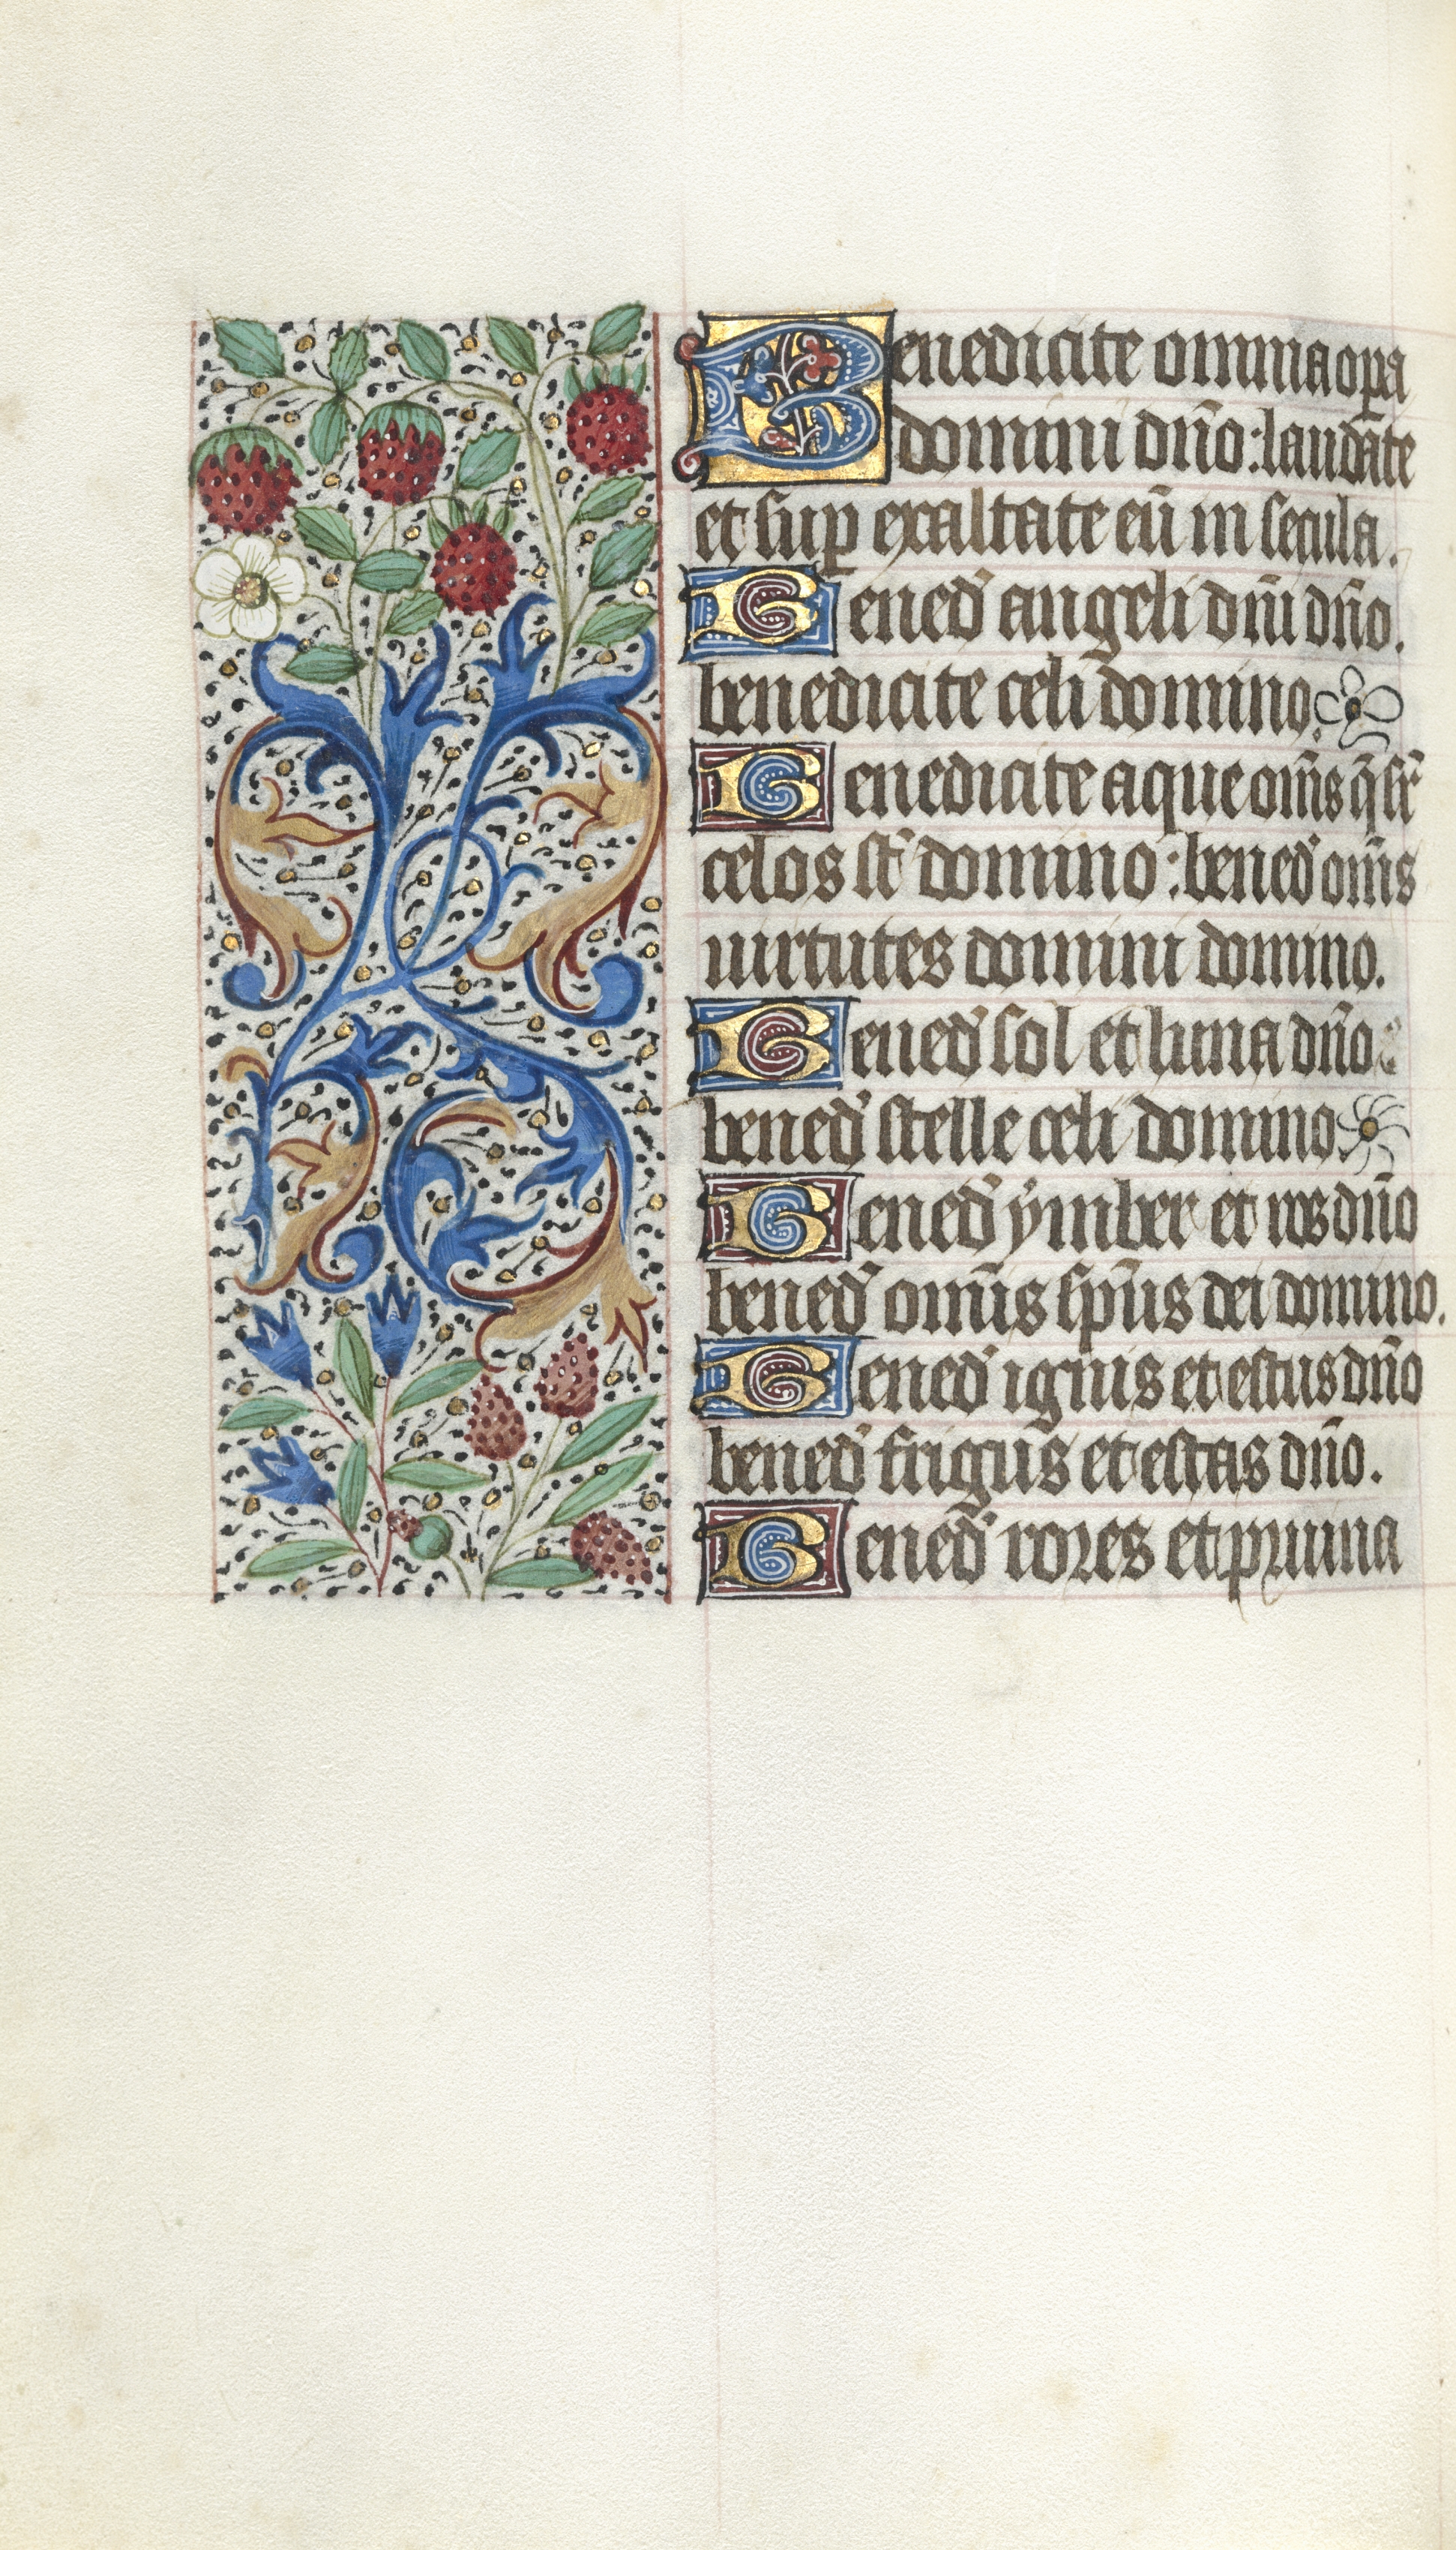 Book of Hours (Use of Rouen): fol. 42v